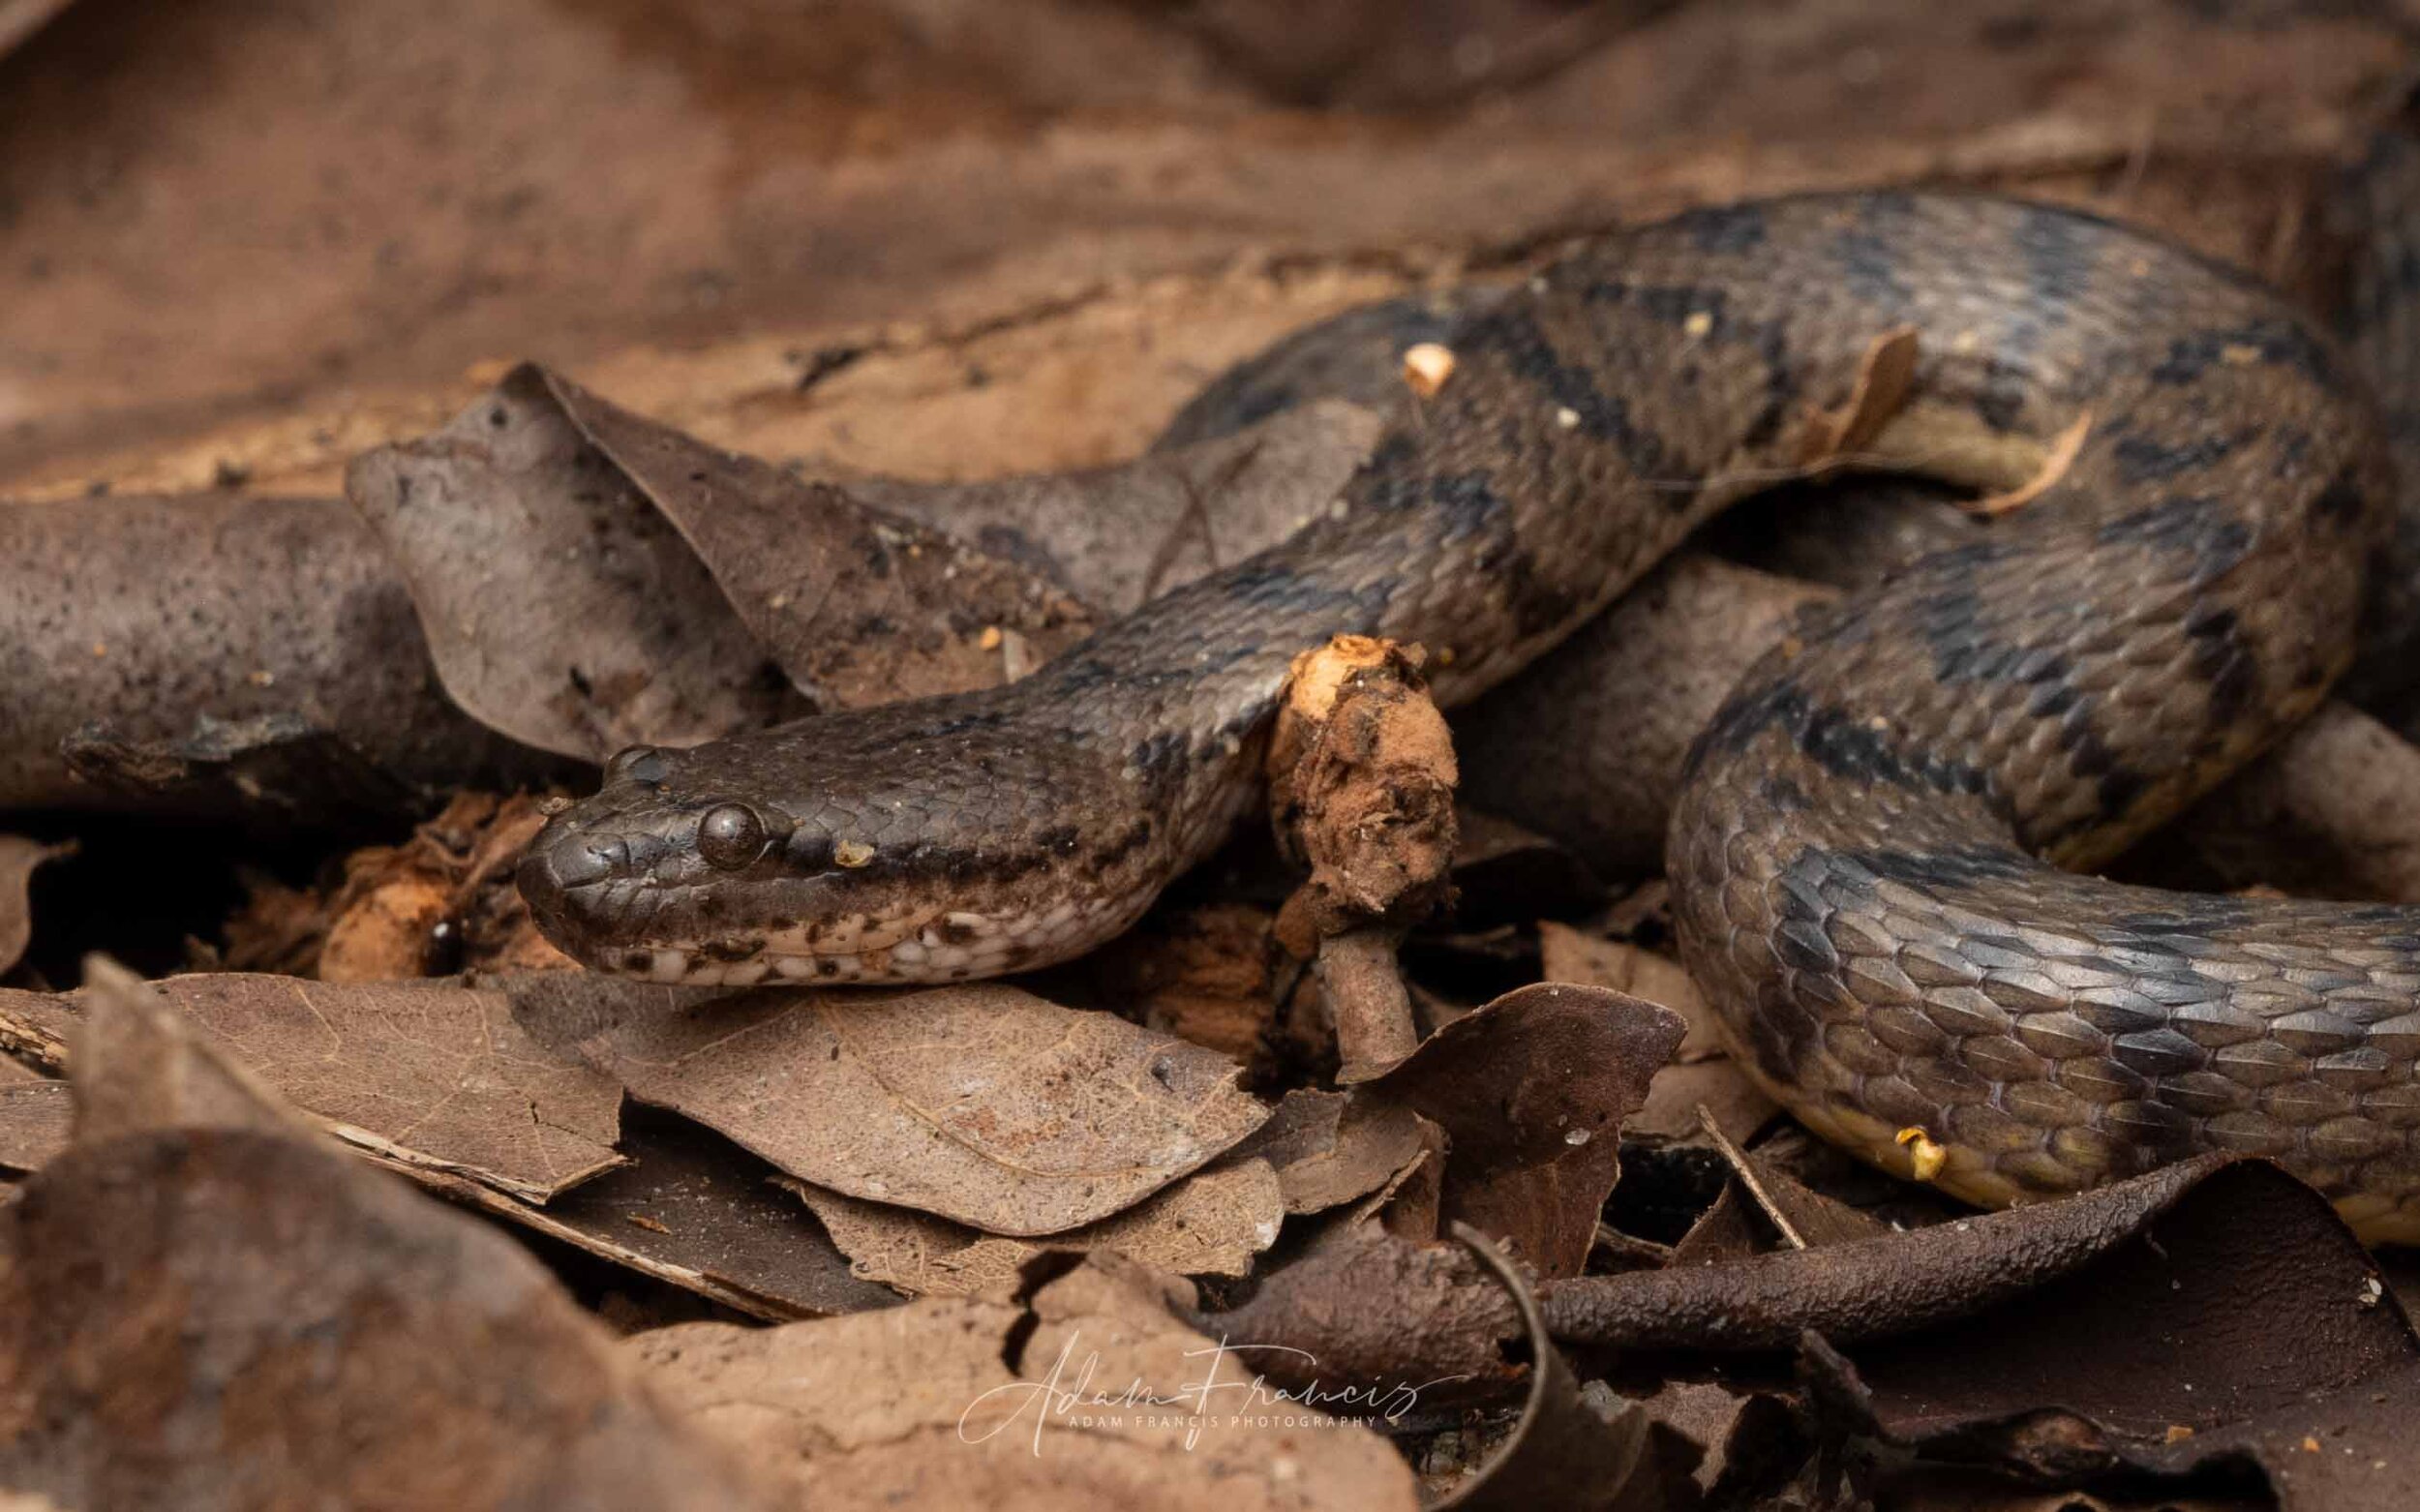 Dog-faced Water Snake - Cerberus rynchops